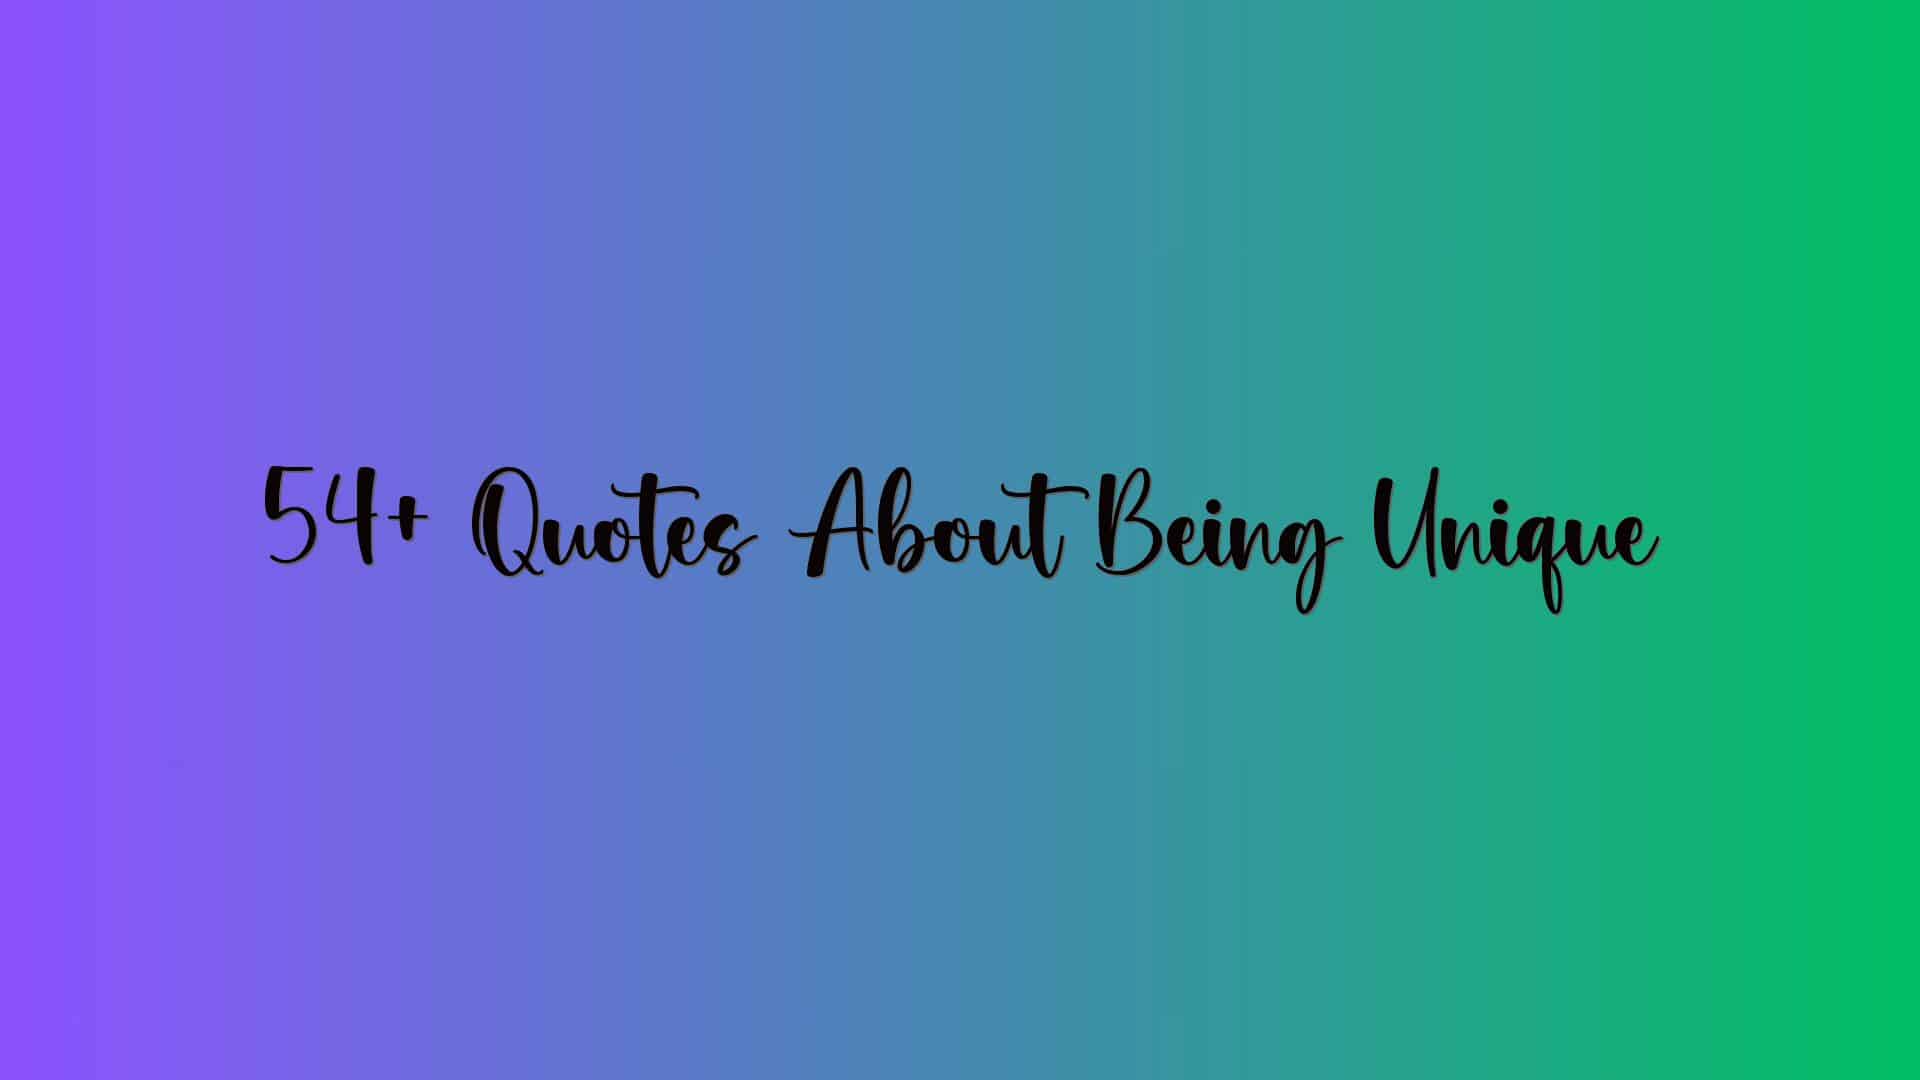 54+ Quotes About Being Unique